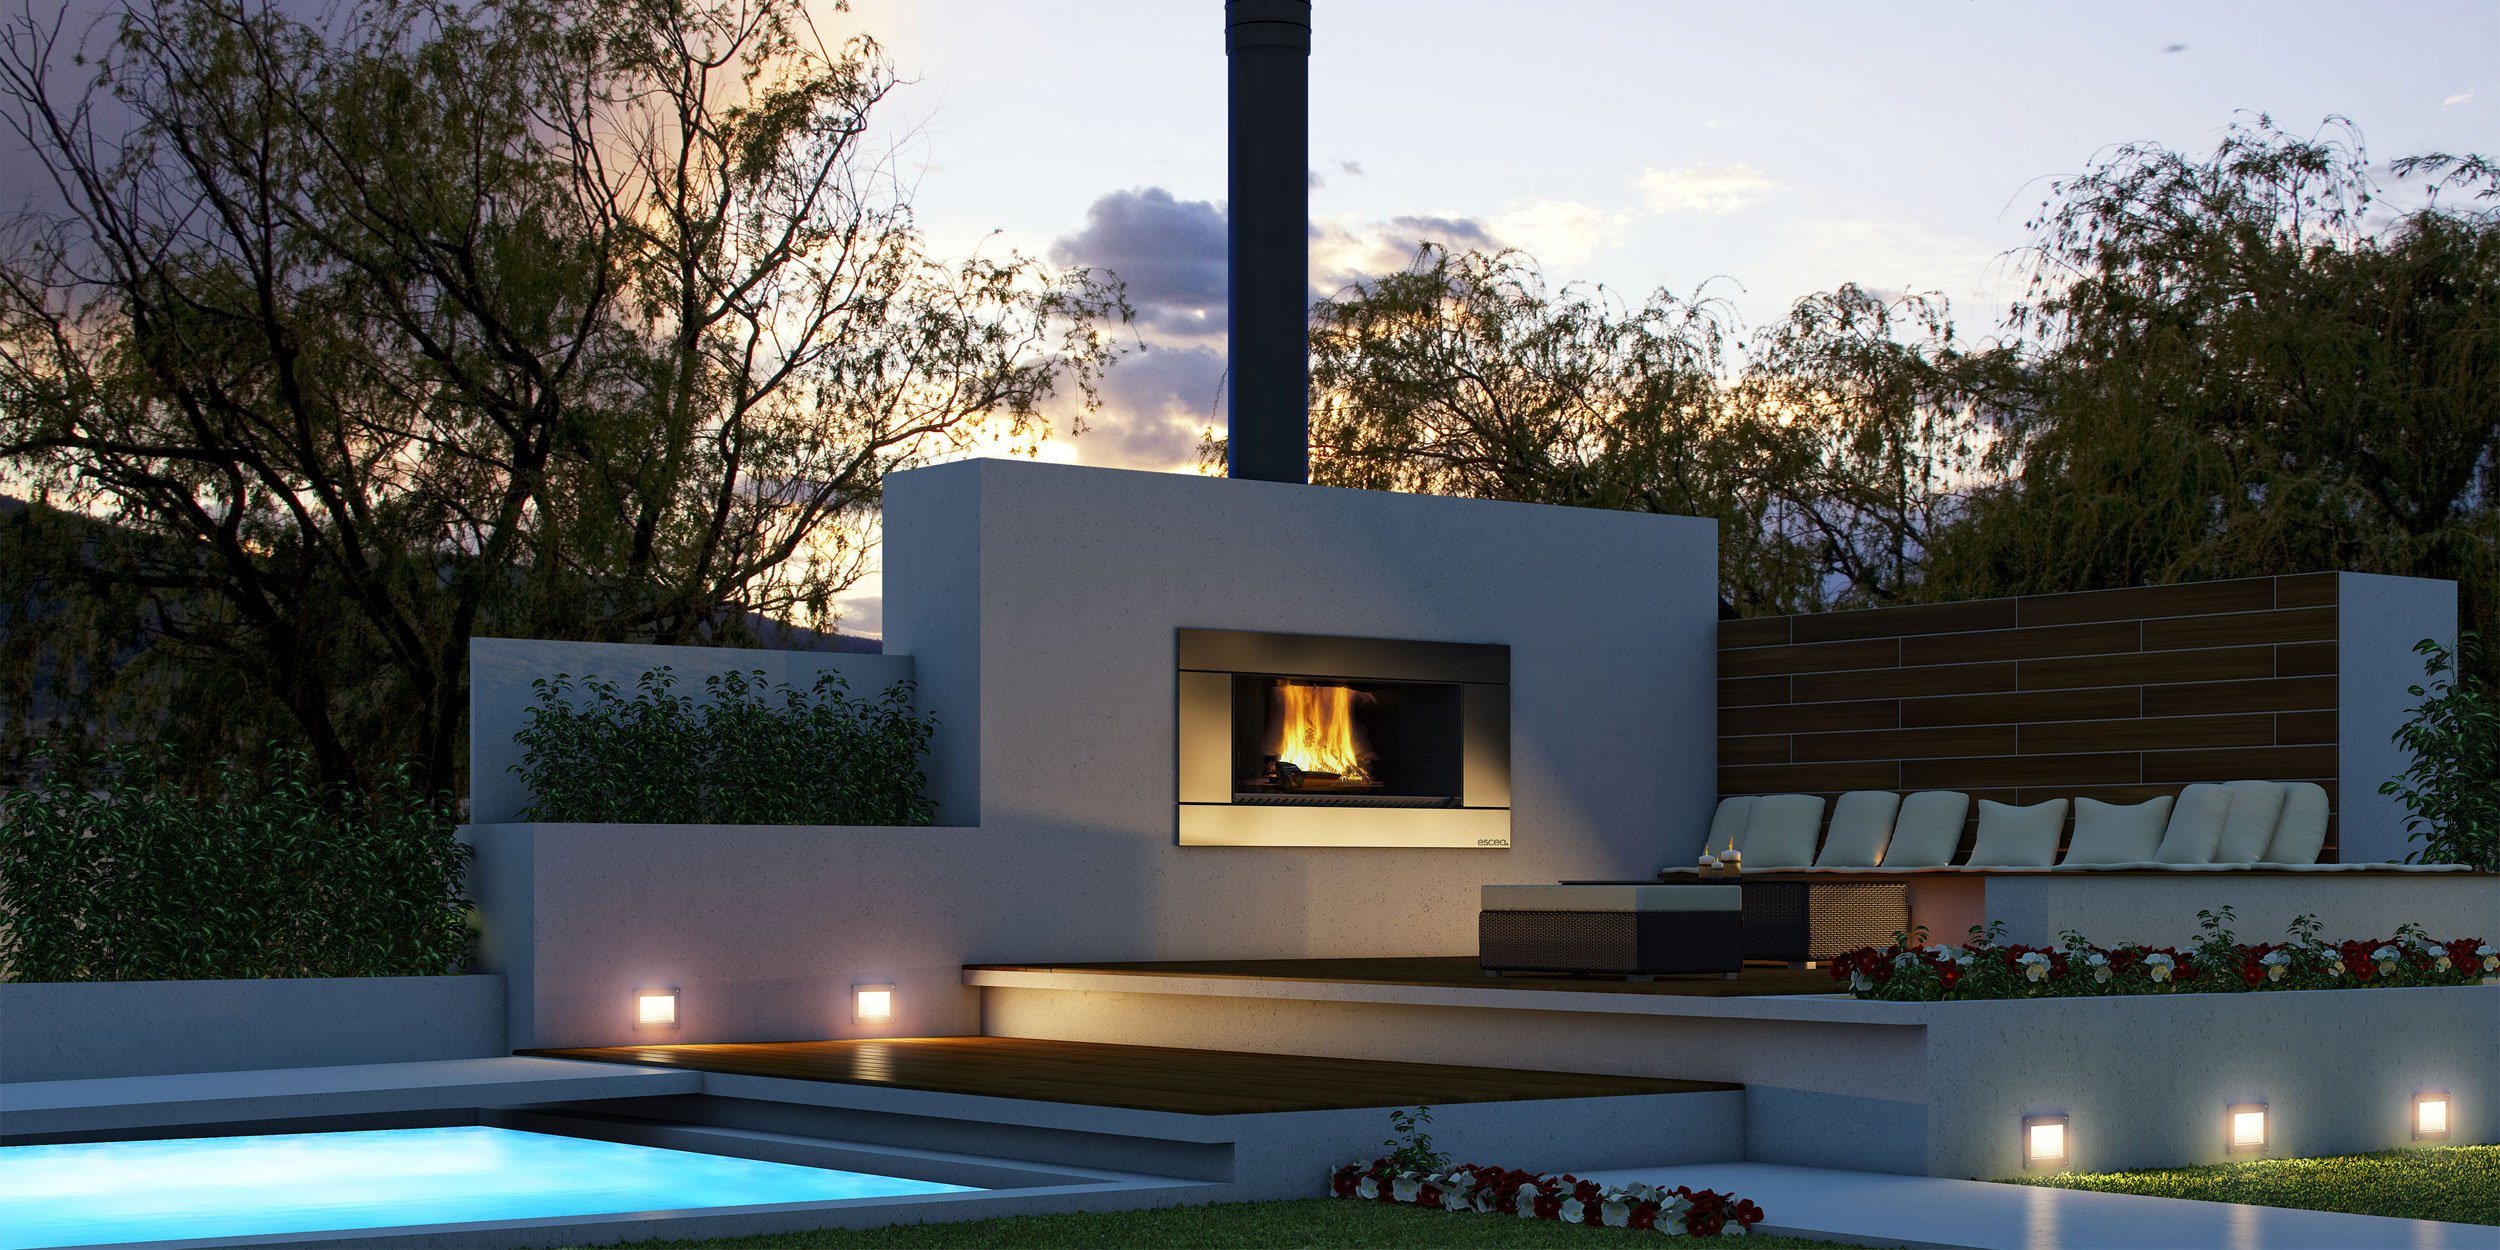 Wooden floored outdoor sitting area by the pool with a comforting outdoor fire built into a large white stone wall